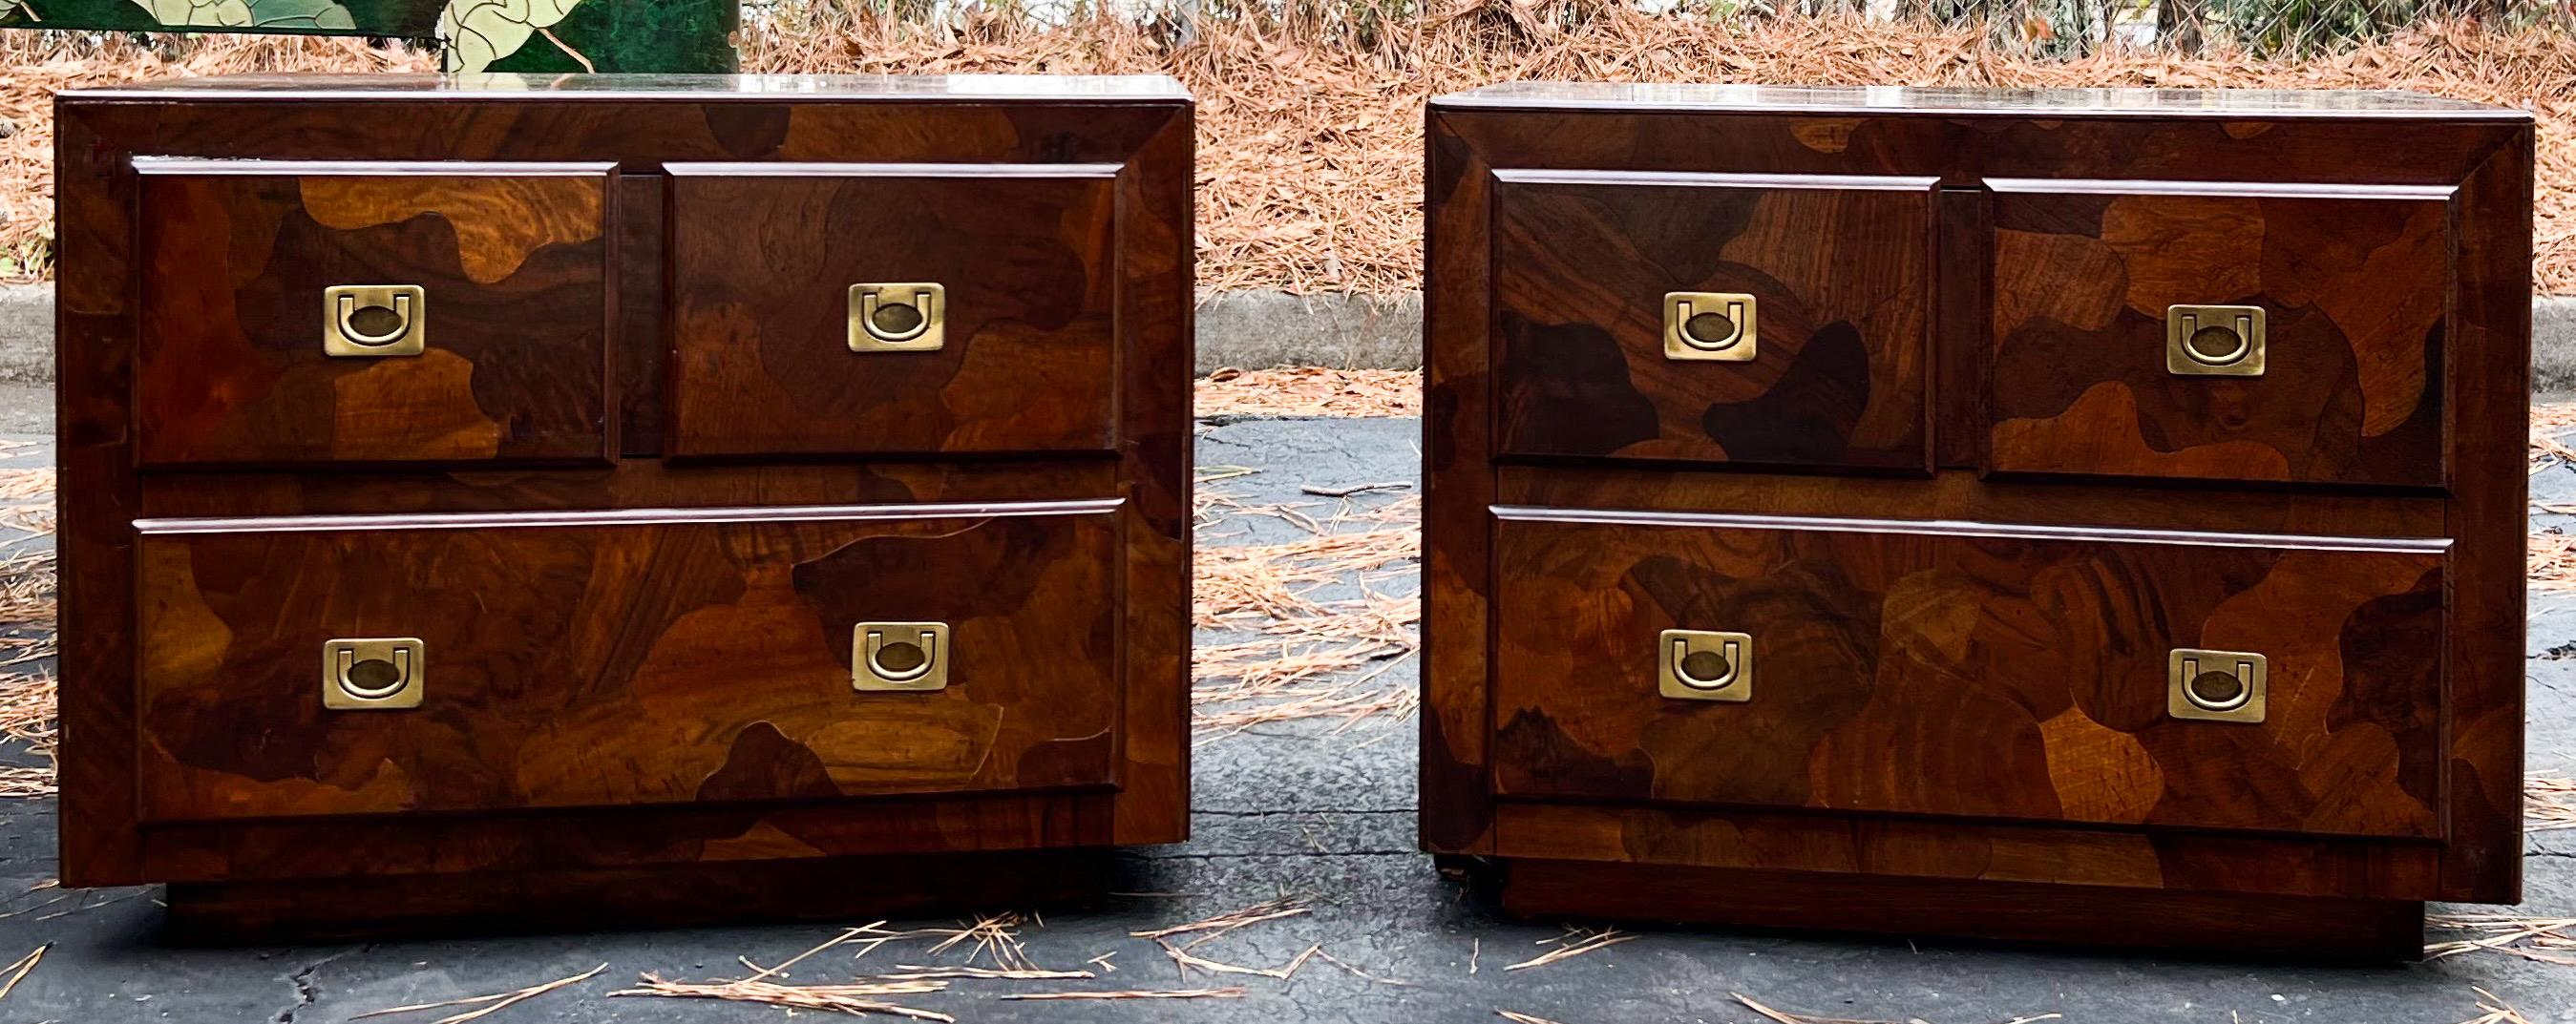 This is a pair of American of Martinsville modern campaign style side tables or nightstands. They are marked and have the original brass hardware. The modern styling and patchwork burl are striking when combined. 

My shipping is for the